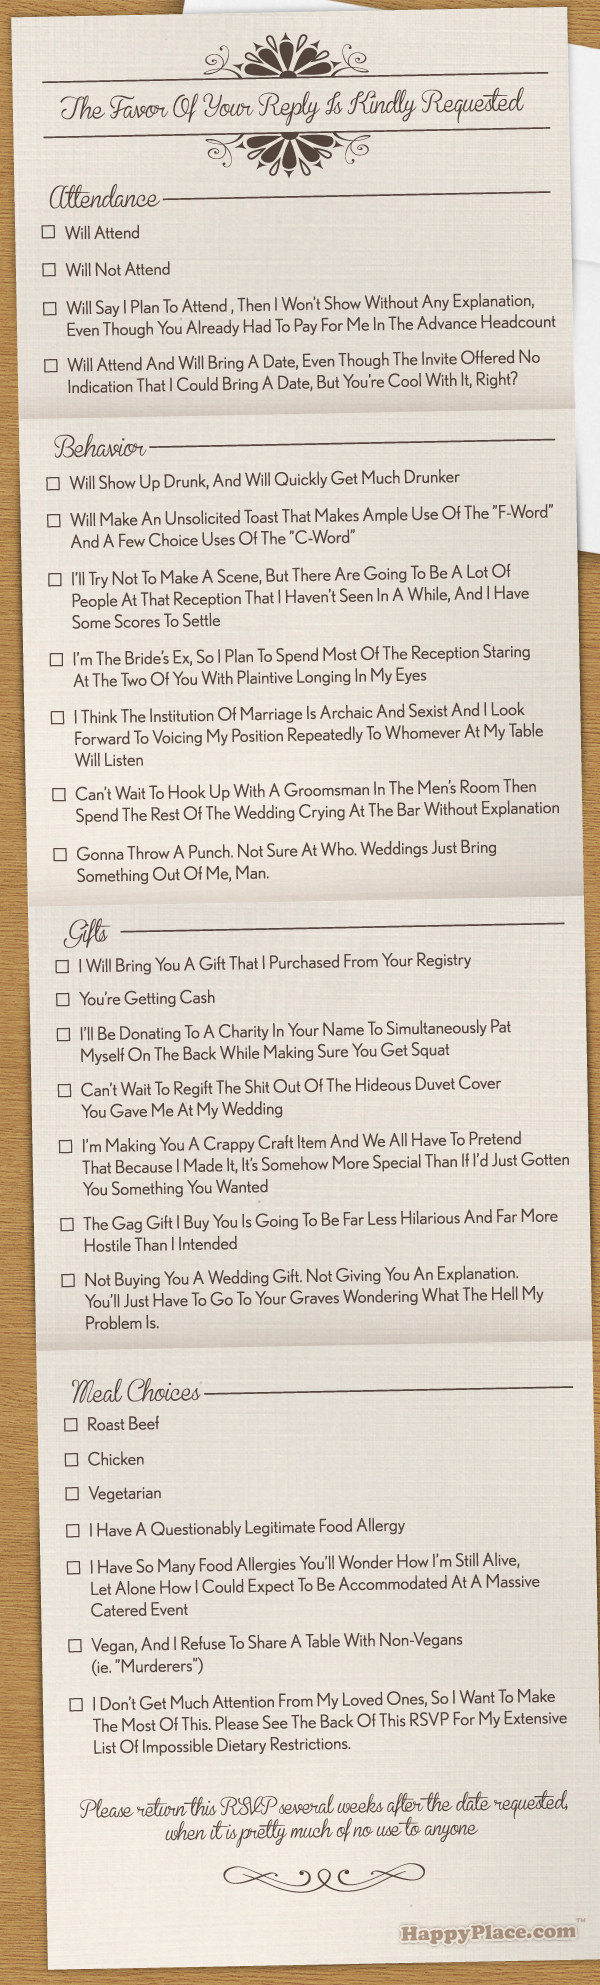 This wedding RSVP card covers pretty much every horrible wedding guest that could possibly be invited to a wedding.